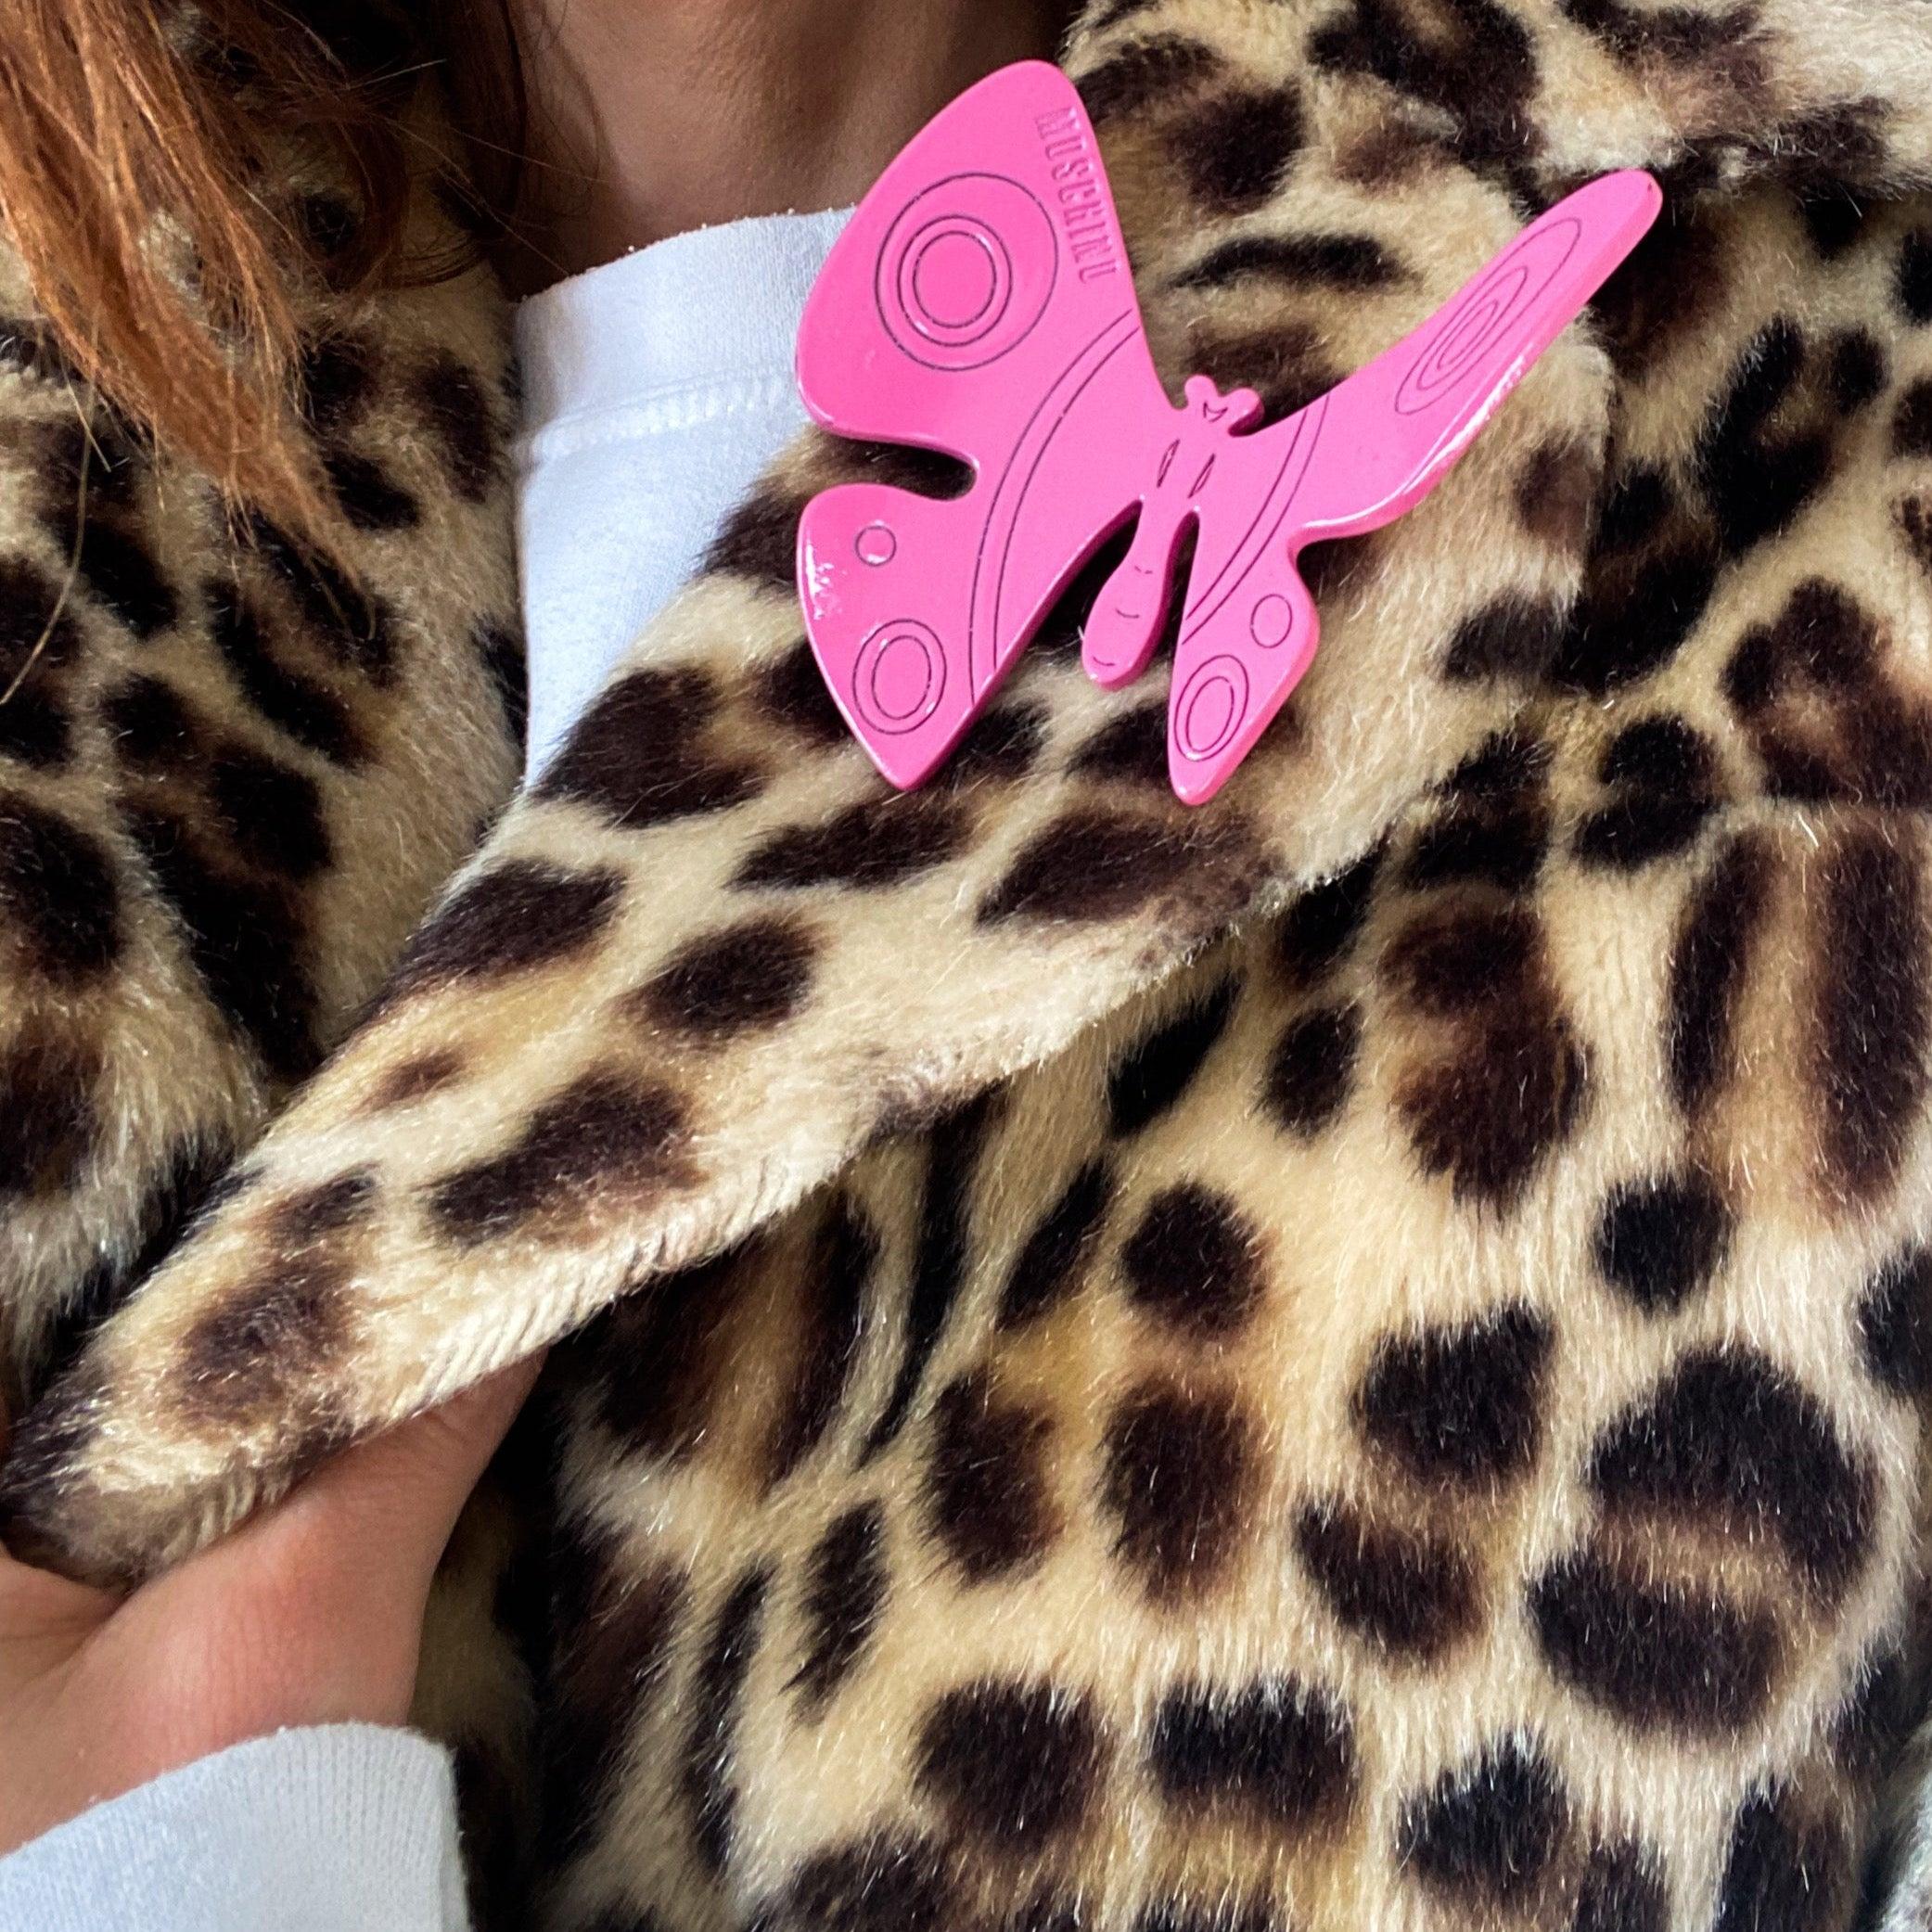 Vintage Moschino Butterfly Brooch in Pink, 1990s

Super cool 90s piece from the iconic house of Moschino. Made in Italy in the 1990s from a hot pink acrylic embossed with Moschino

Moschino has been known since the 80s for it’s street style take on